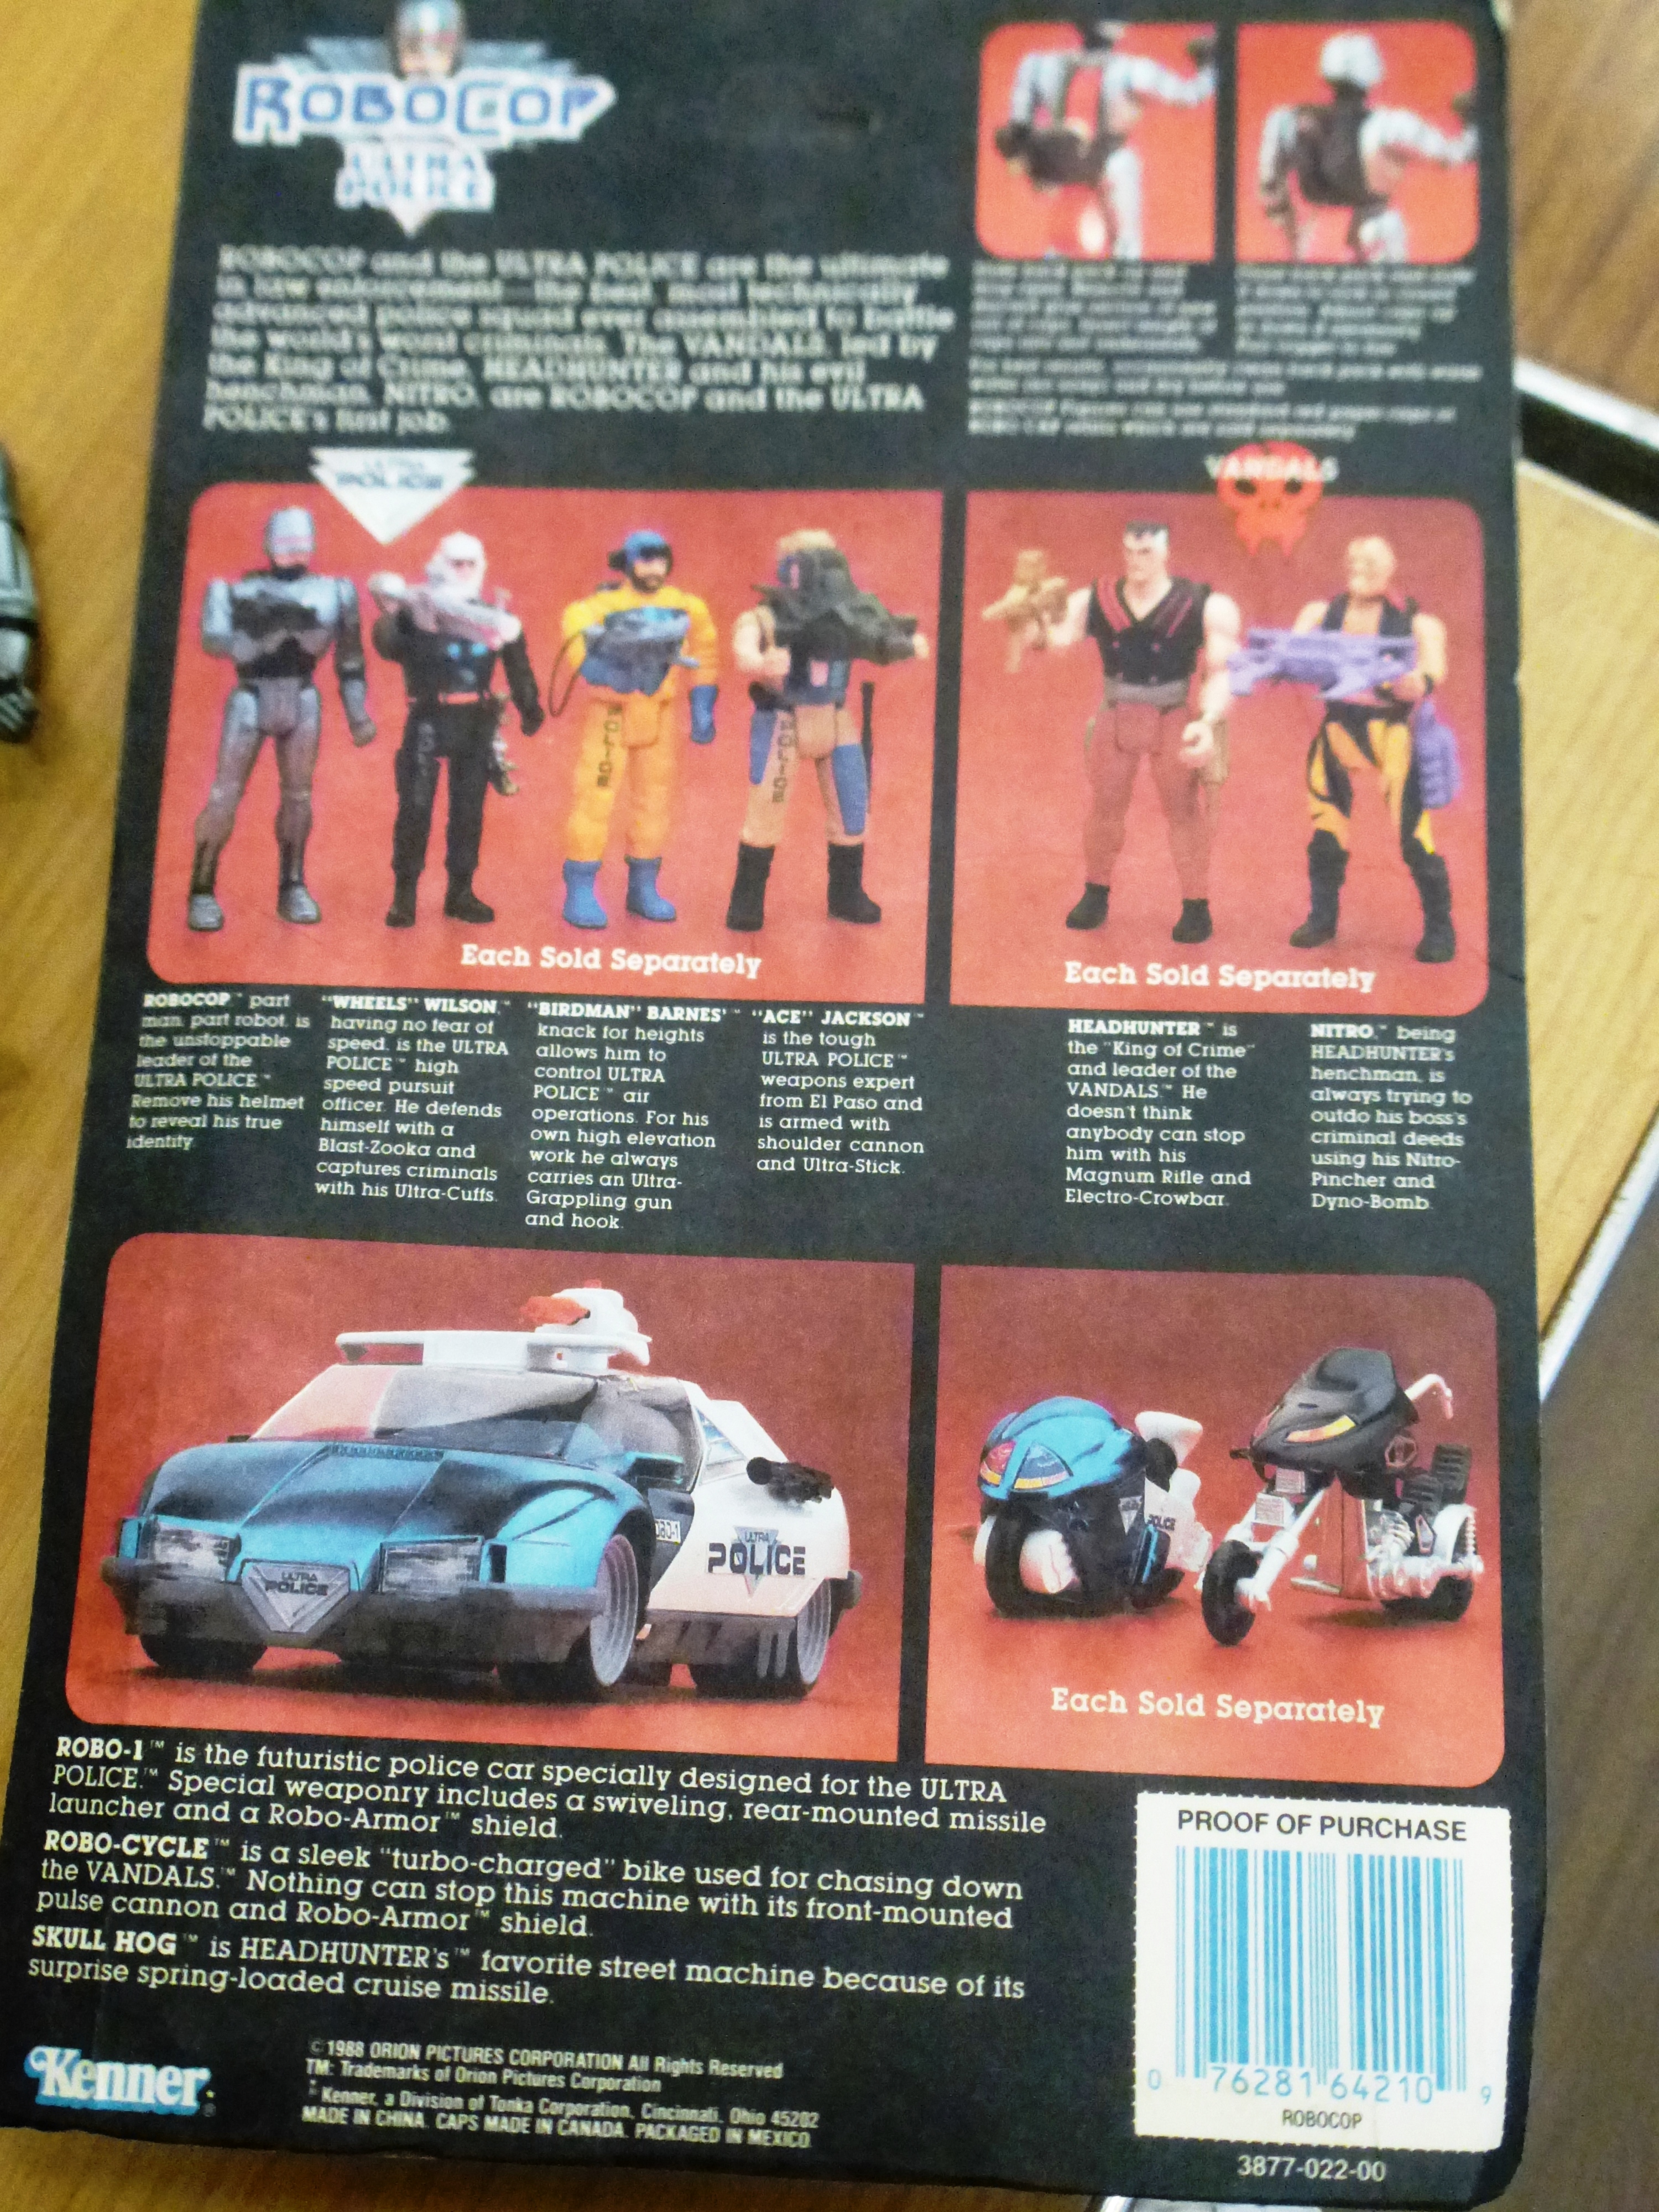 6 ROBOCOP ULTRA POLICE LEADER FIGURES AND A LARGE ROBOCOP FIGURE - Image 4 of 5